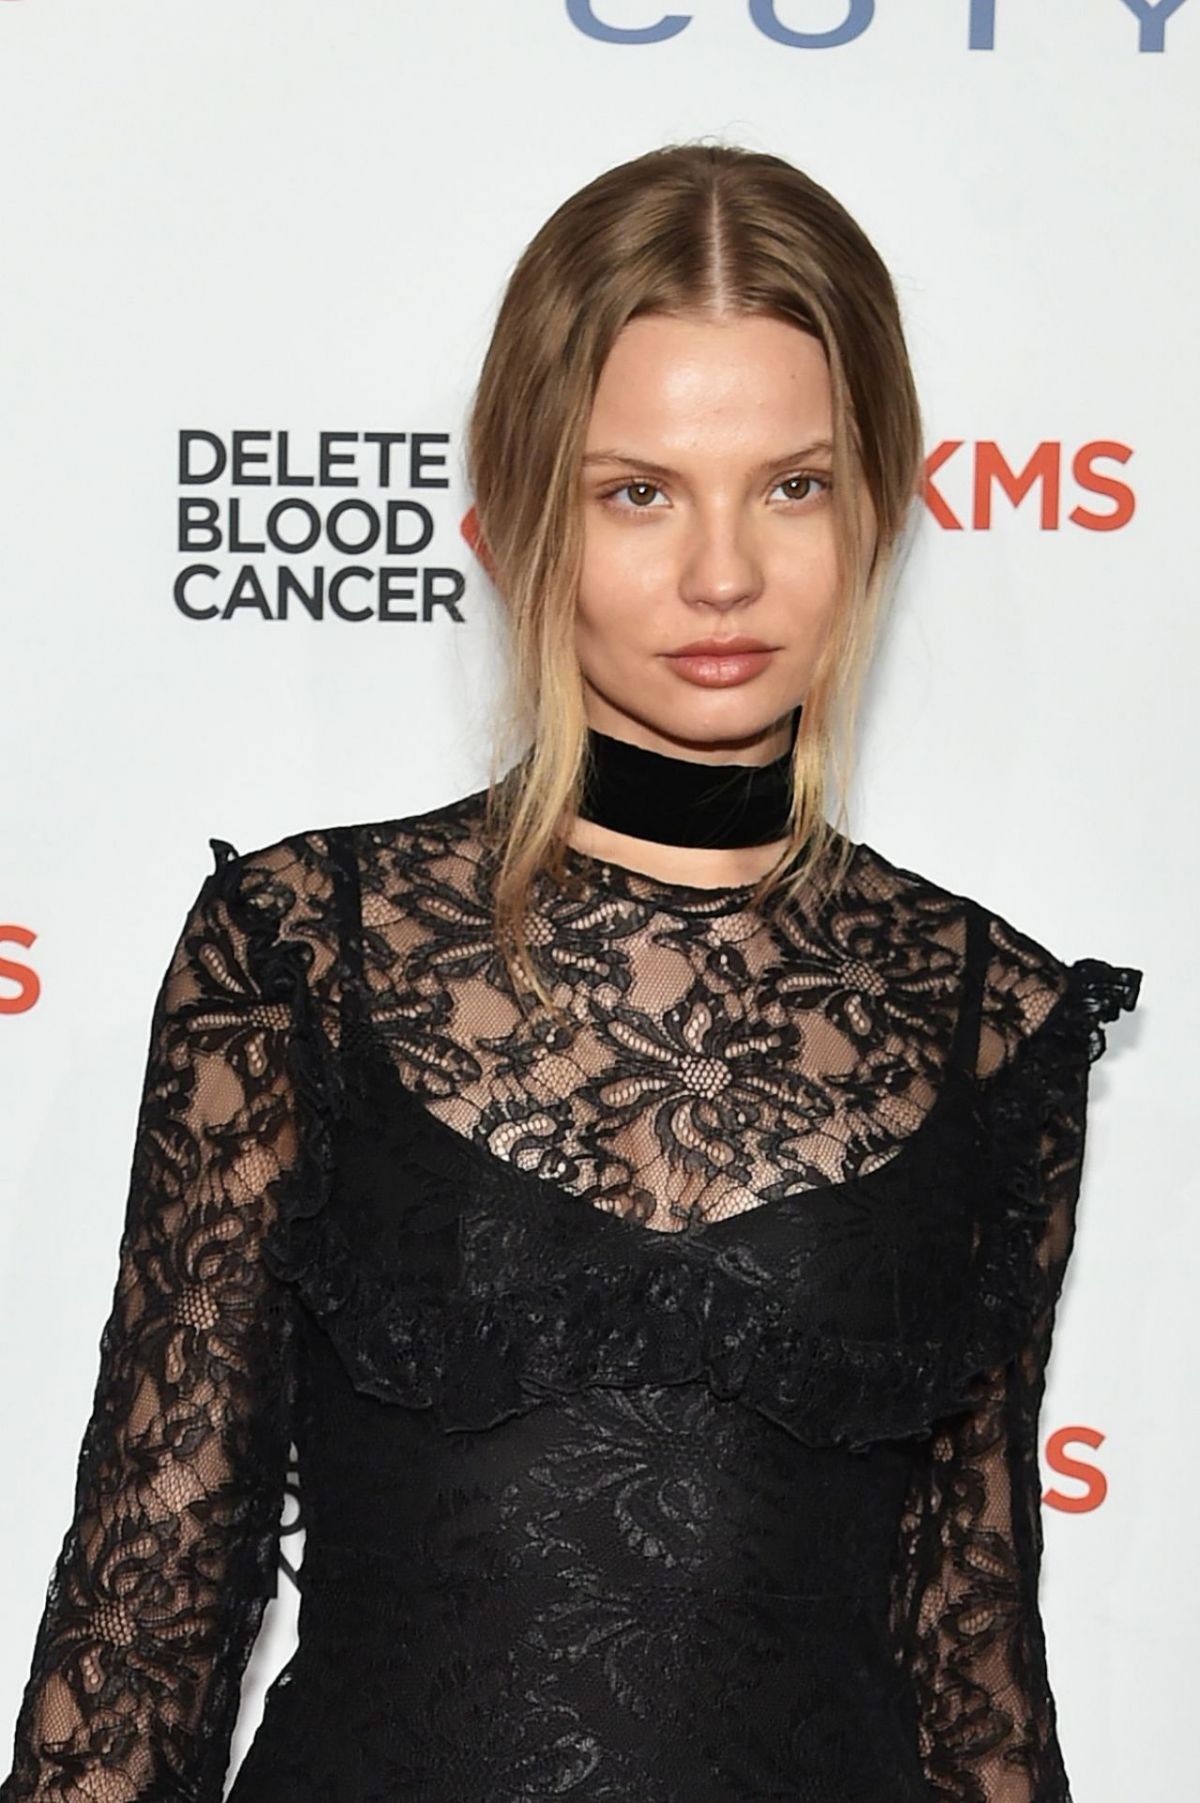 MAGDALENA FRACKOWIAK at 10th Annual Delete Blood Cancer dkms Gala in New York 05/05/2016